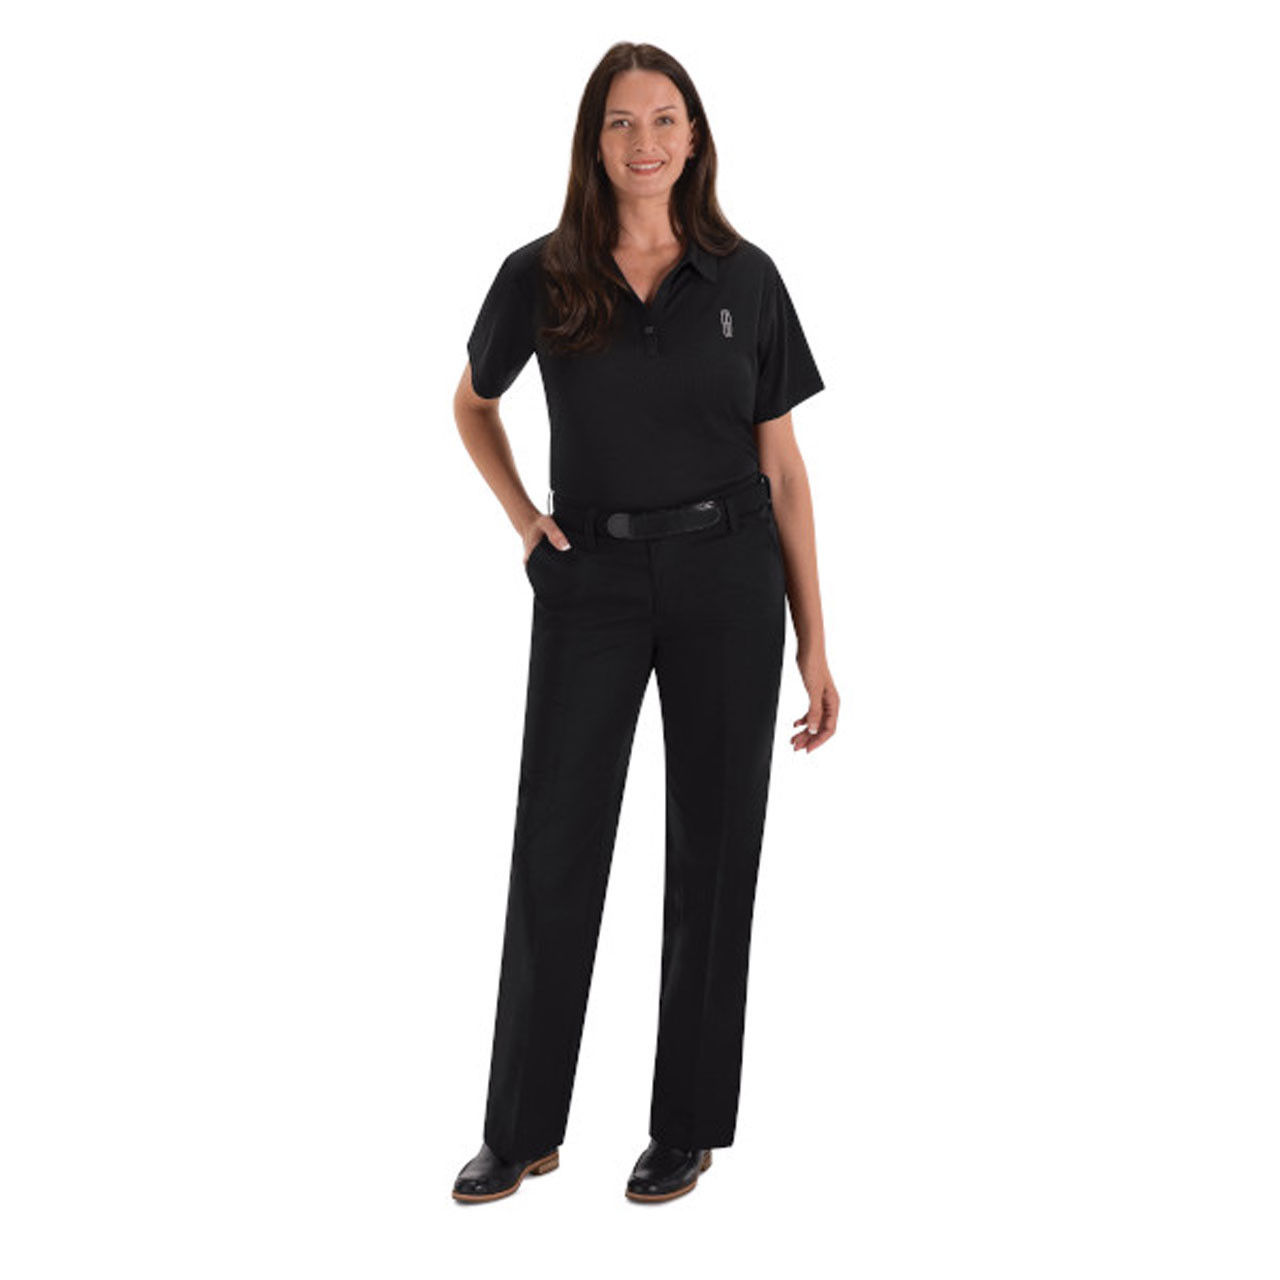 Are these women's industrial work pants home washable?